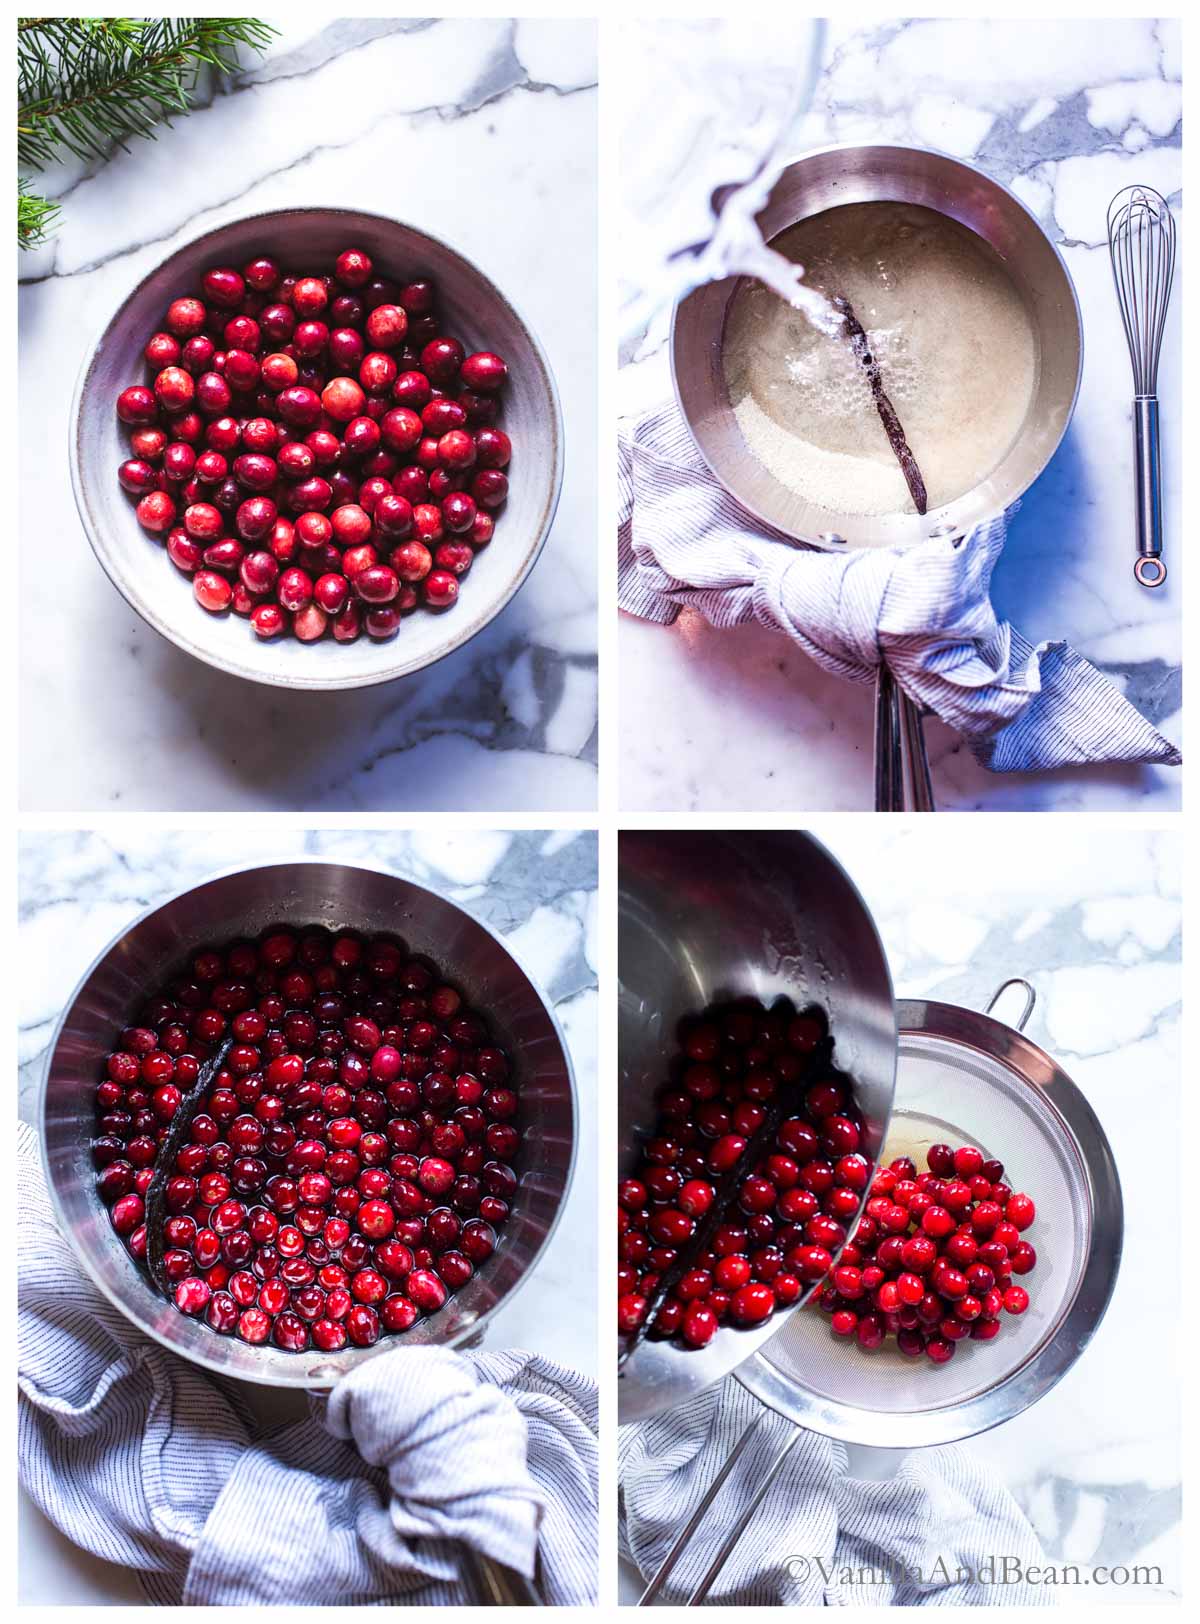 Four images of Candy Cranberries: 1. Fresh cranberries in a bowl. 2. Water and sugar in a sauce pan with a vanilla bean. 3. Cranberries soaking in simple syrup. 4. Draining cranberries into a strainer.